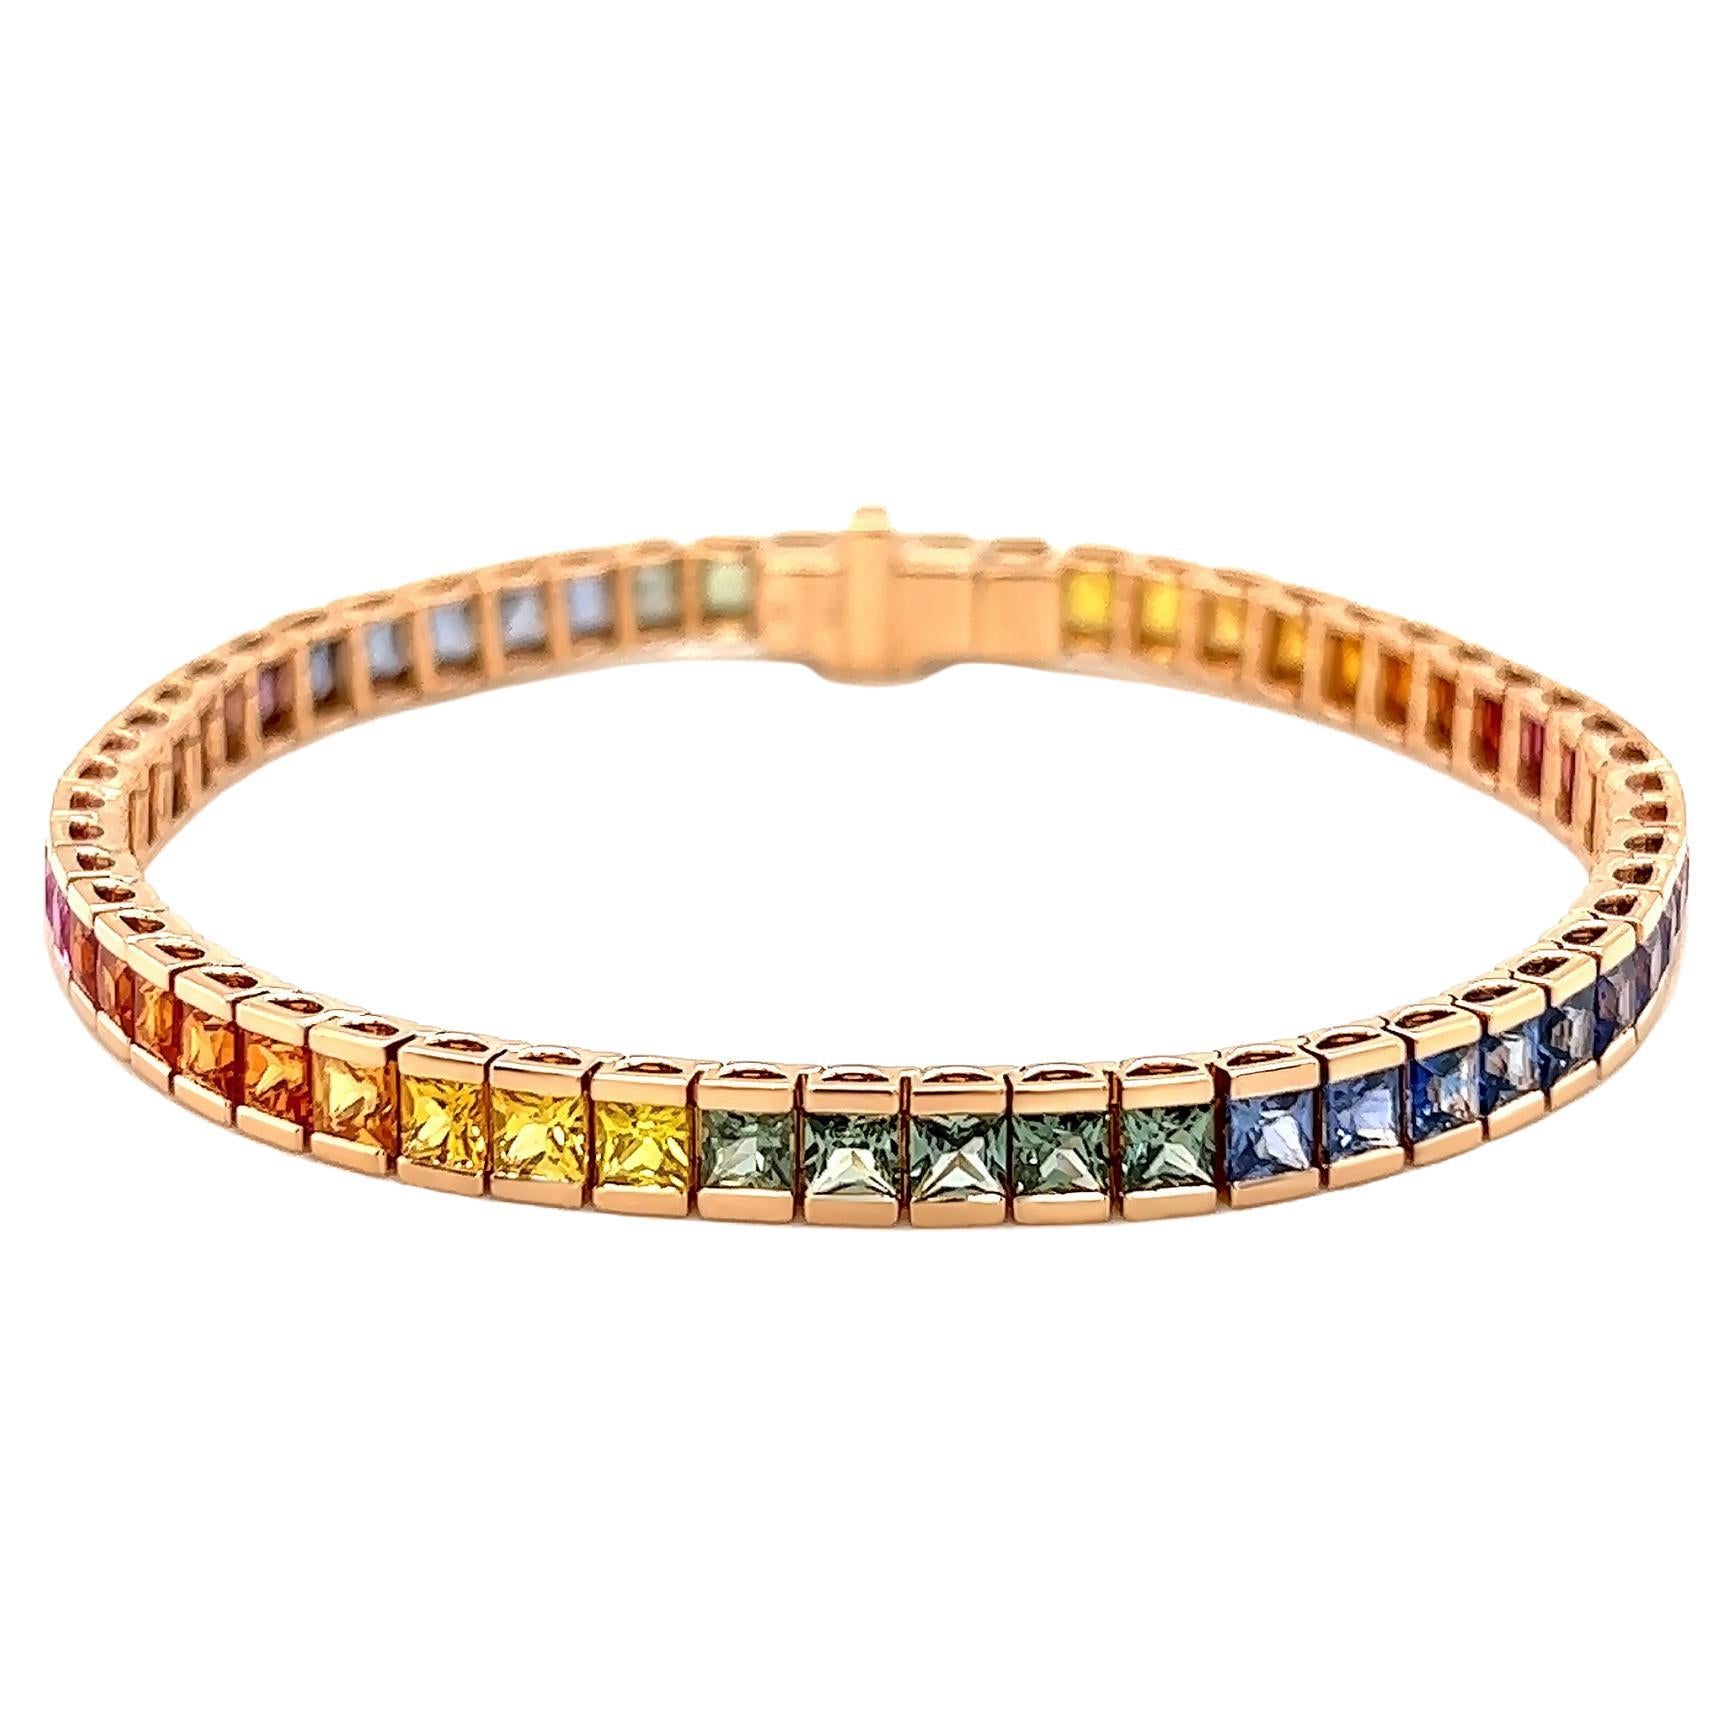 10.63ct Natural Sapphire Rainbow Bracelet in 18k Rose Gold